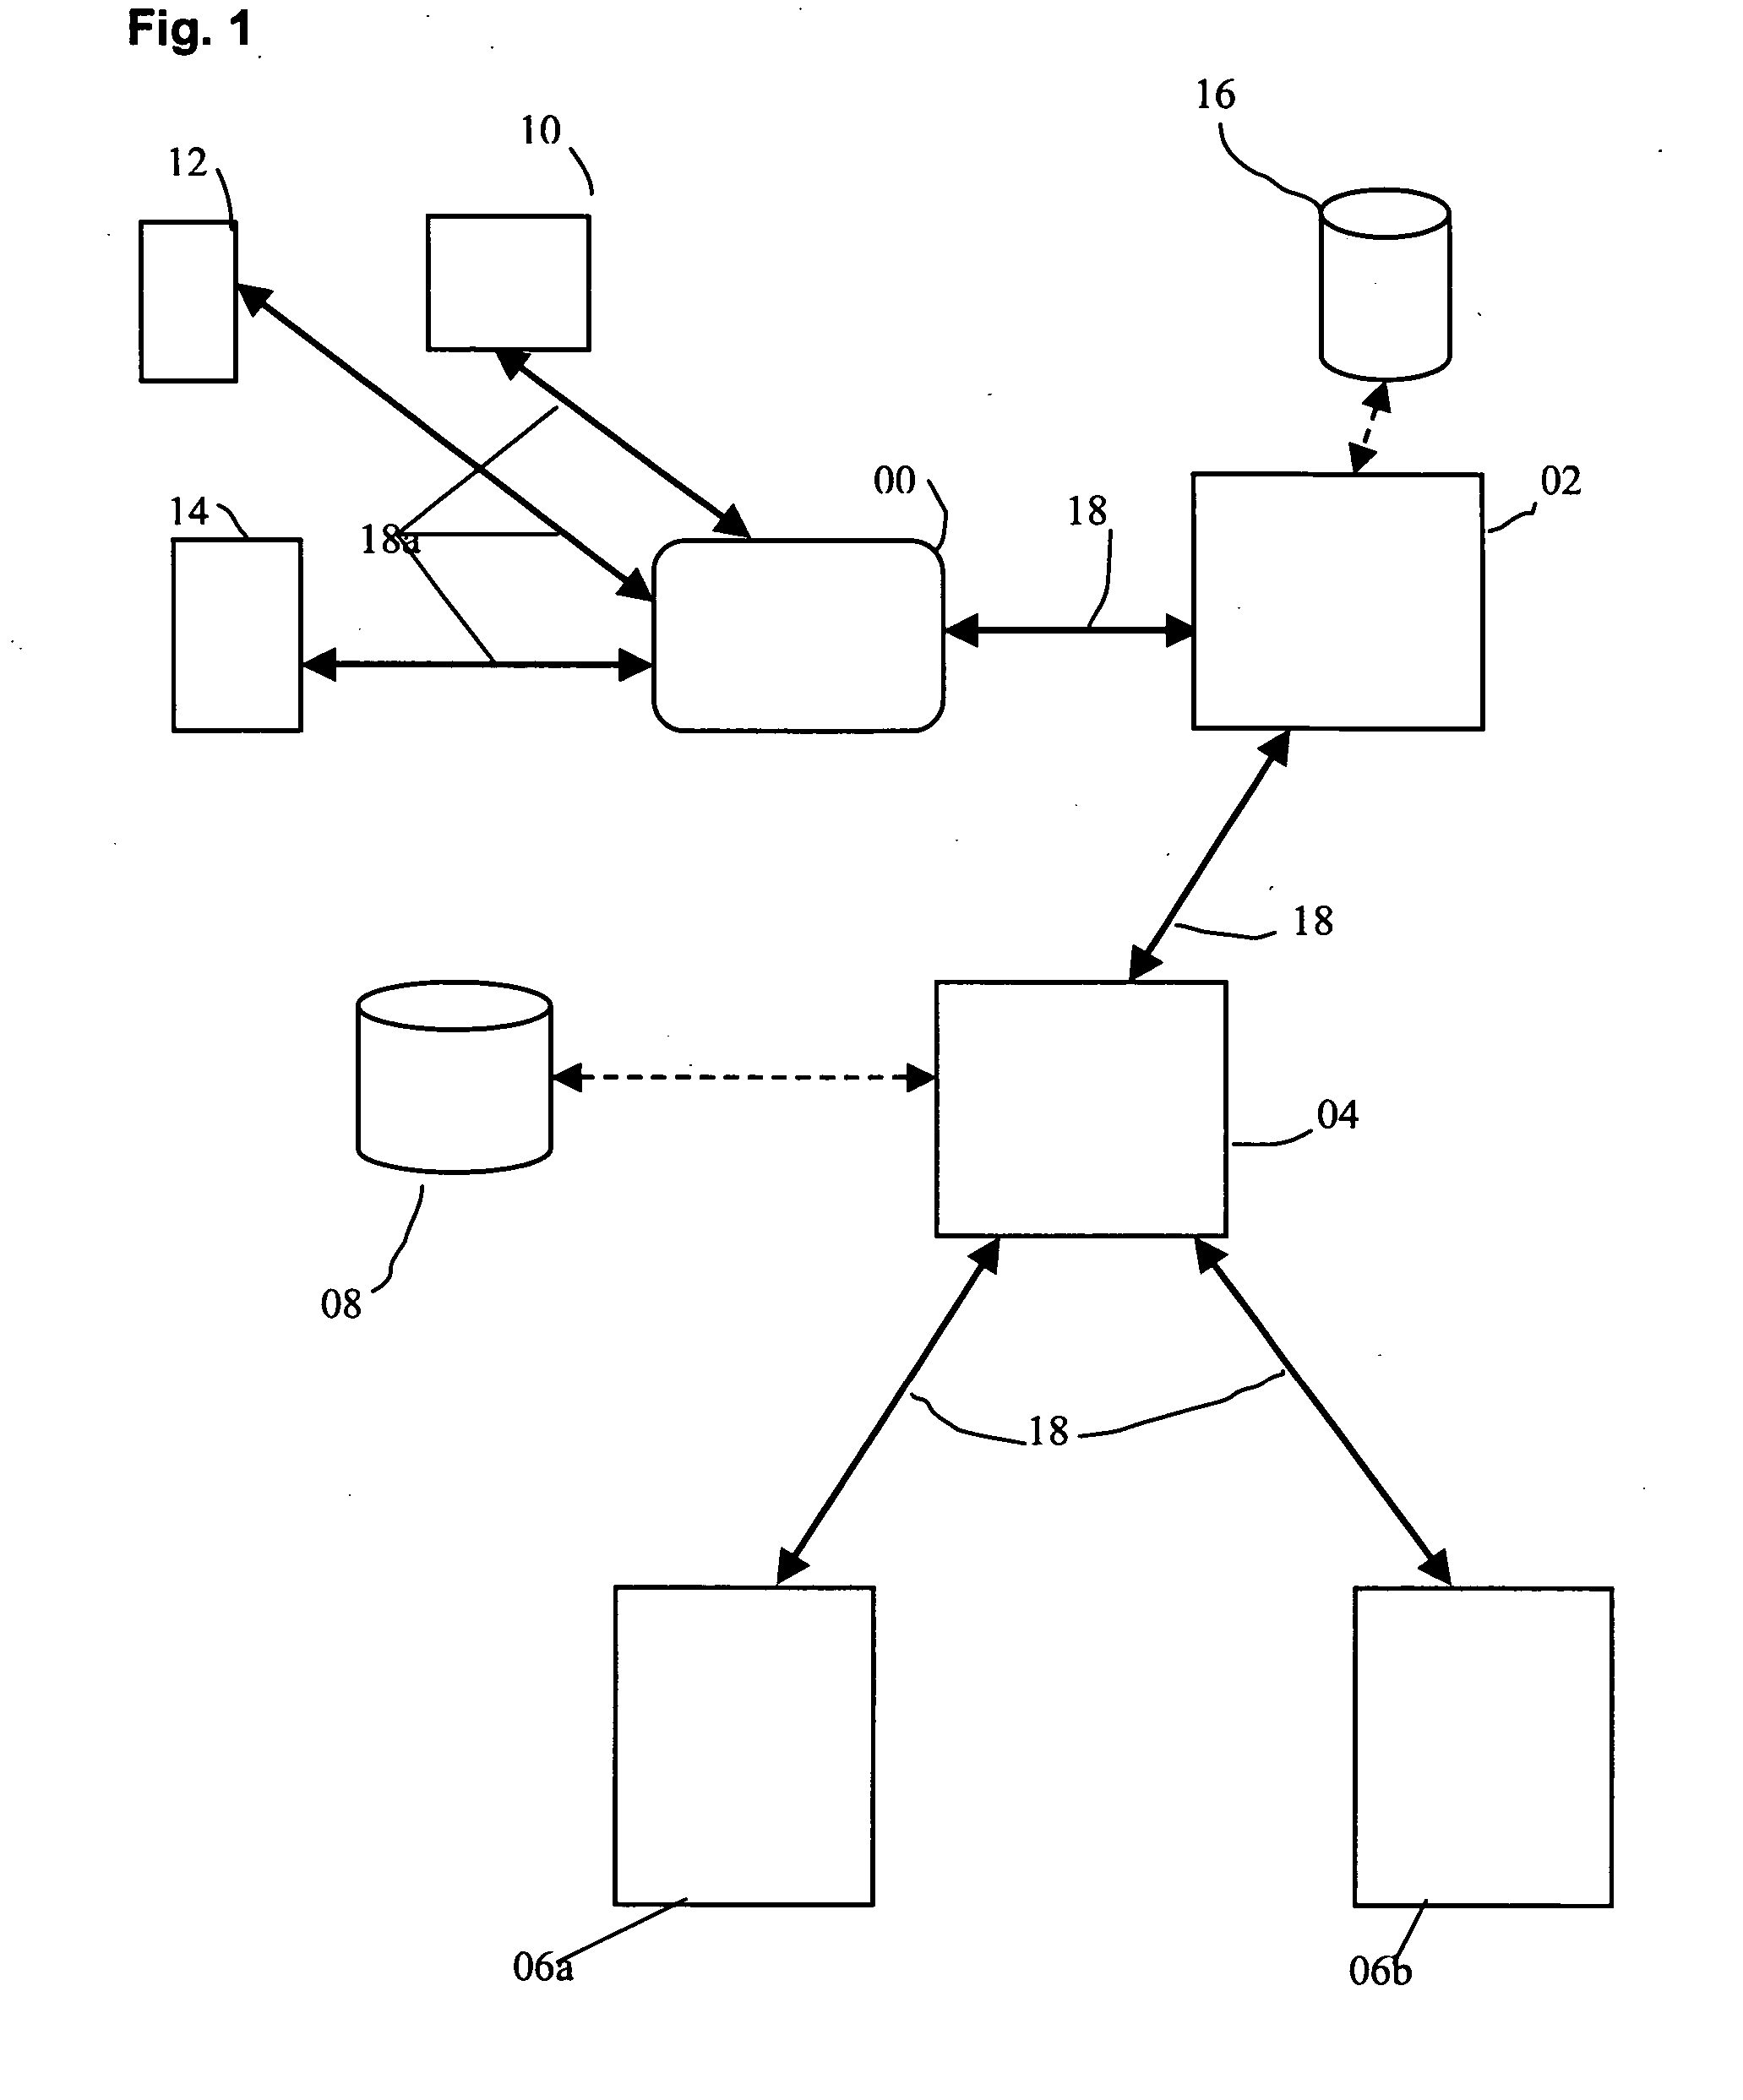 Method and system for managing, analyzing and automating data in the production of semiconductor wafers and for monitoring the production process